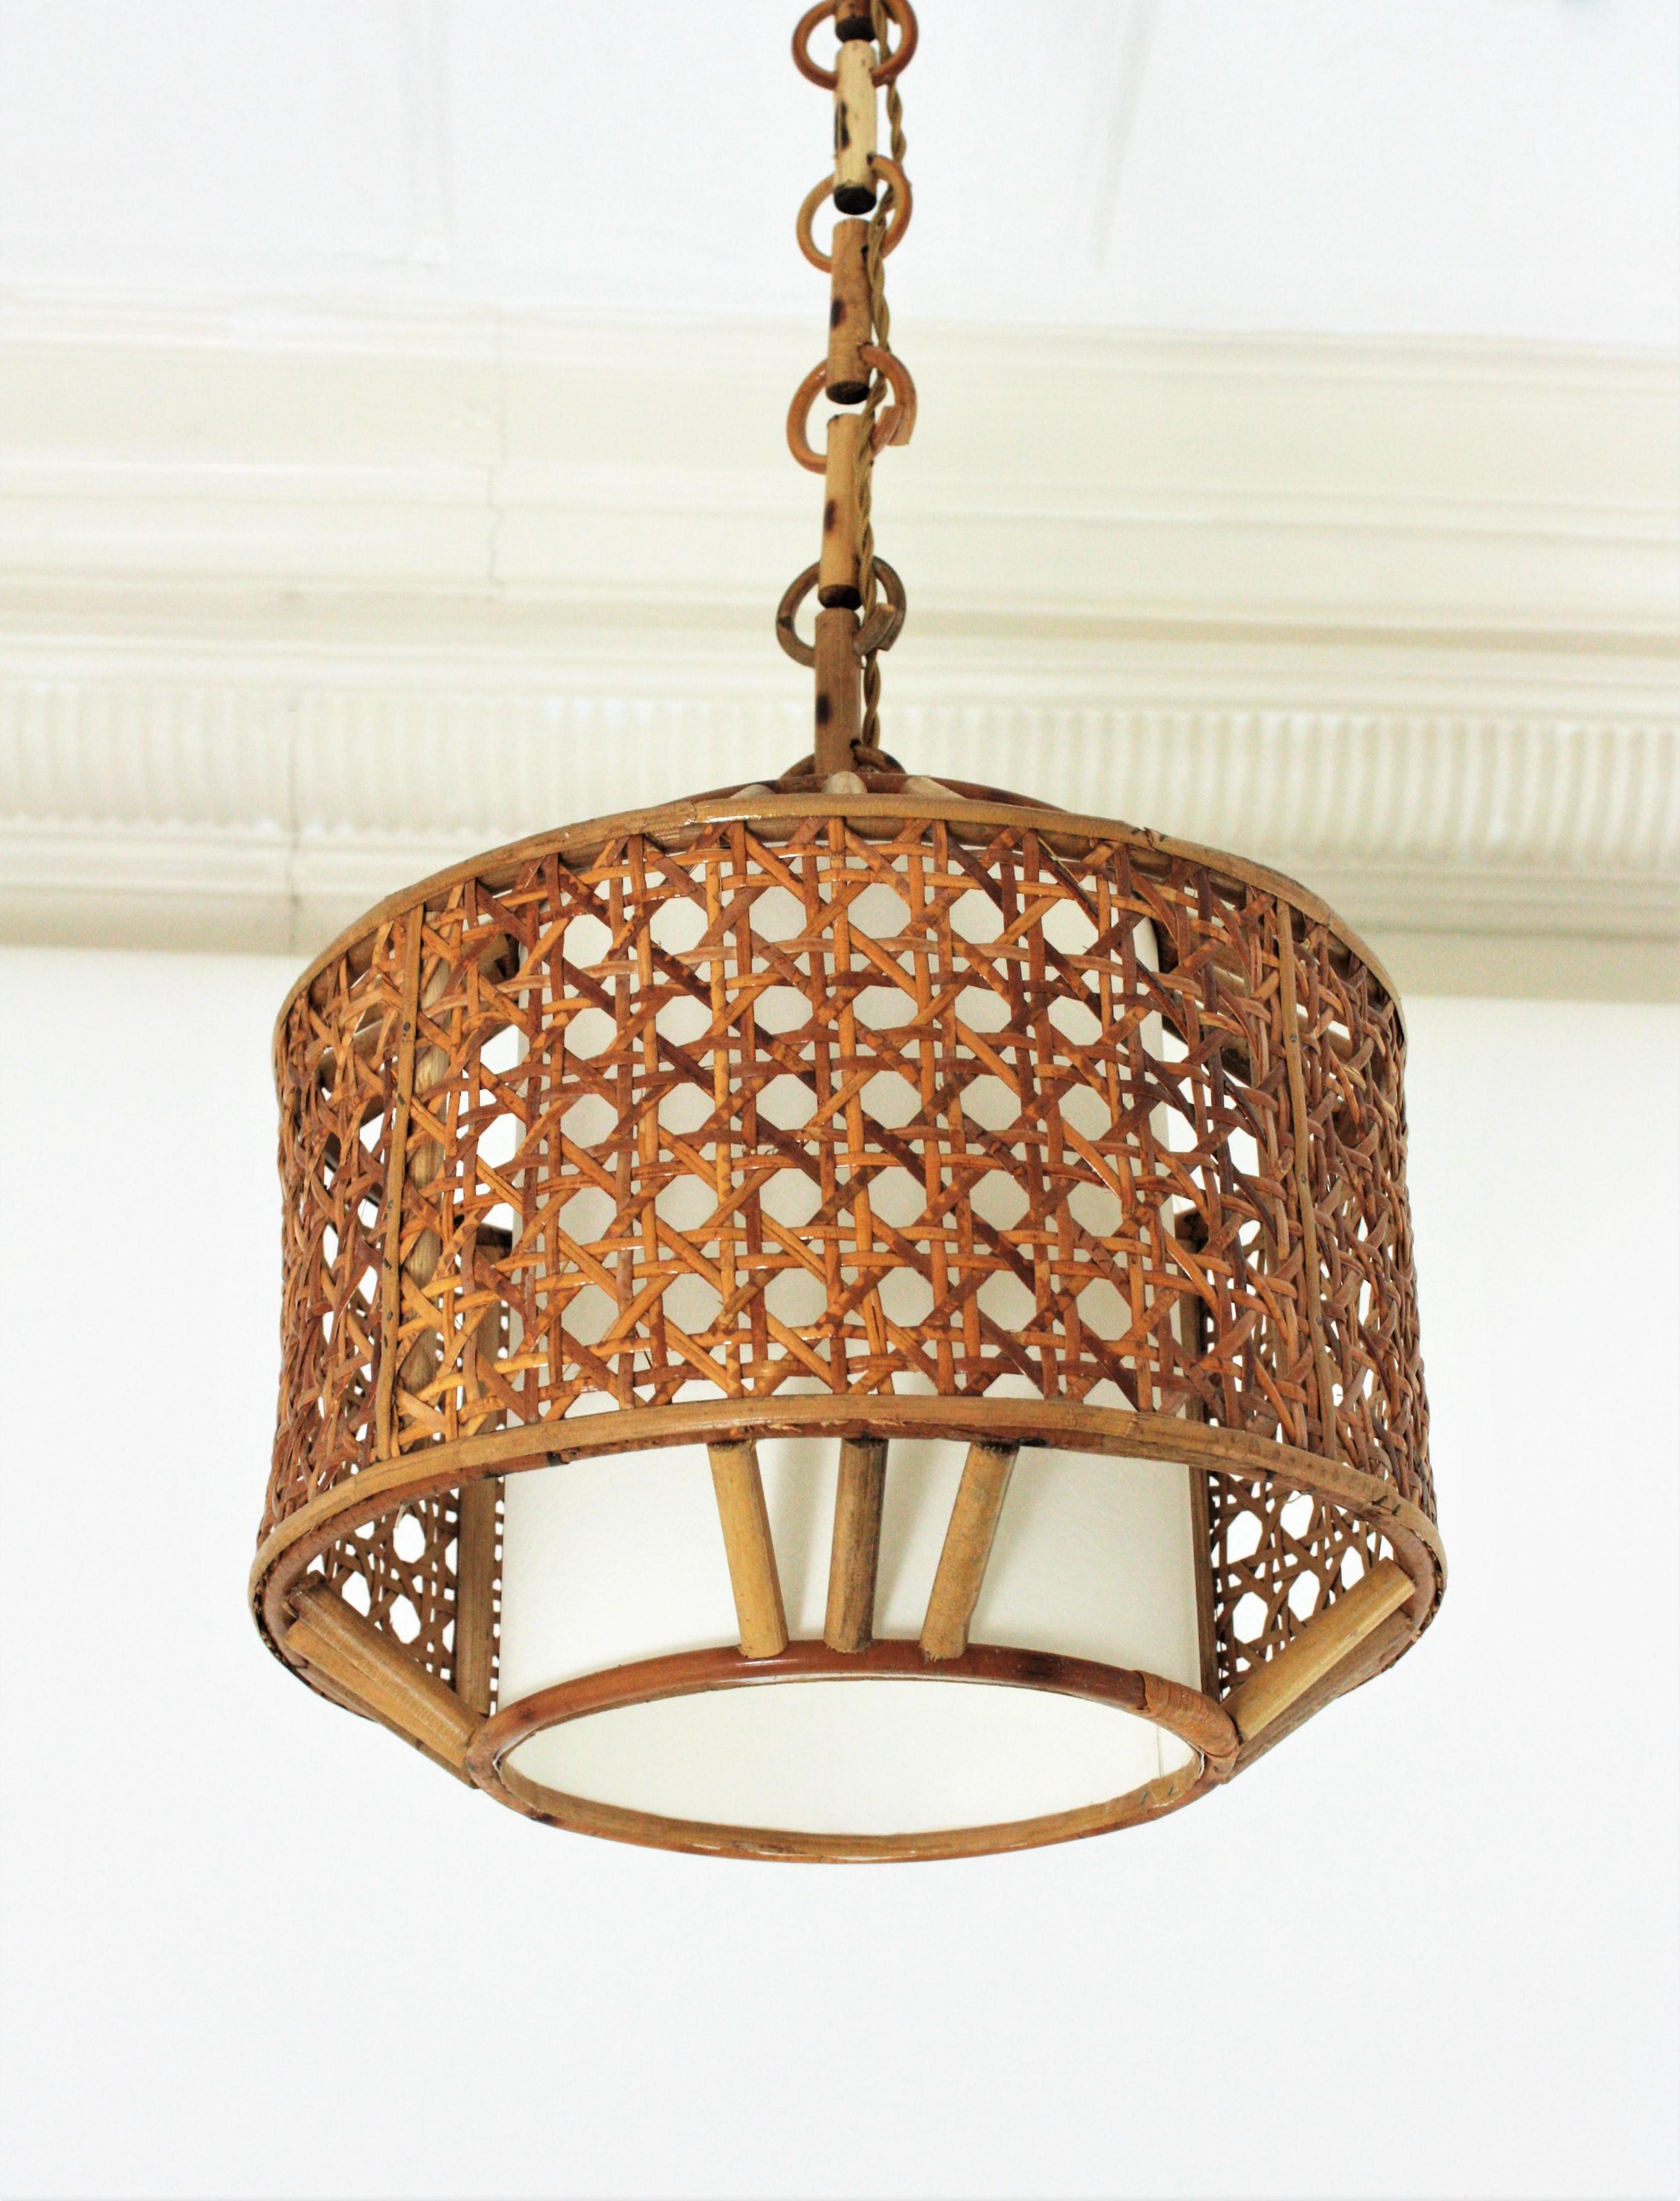 Bamboo Rattan and Wicker Weave Drum Pendant Light or Lantern  In Good Condition For Sale In Barcelona, ES